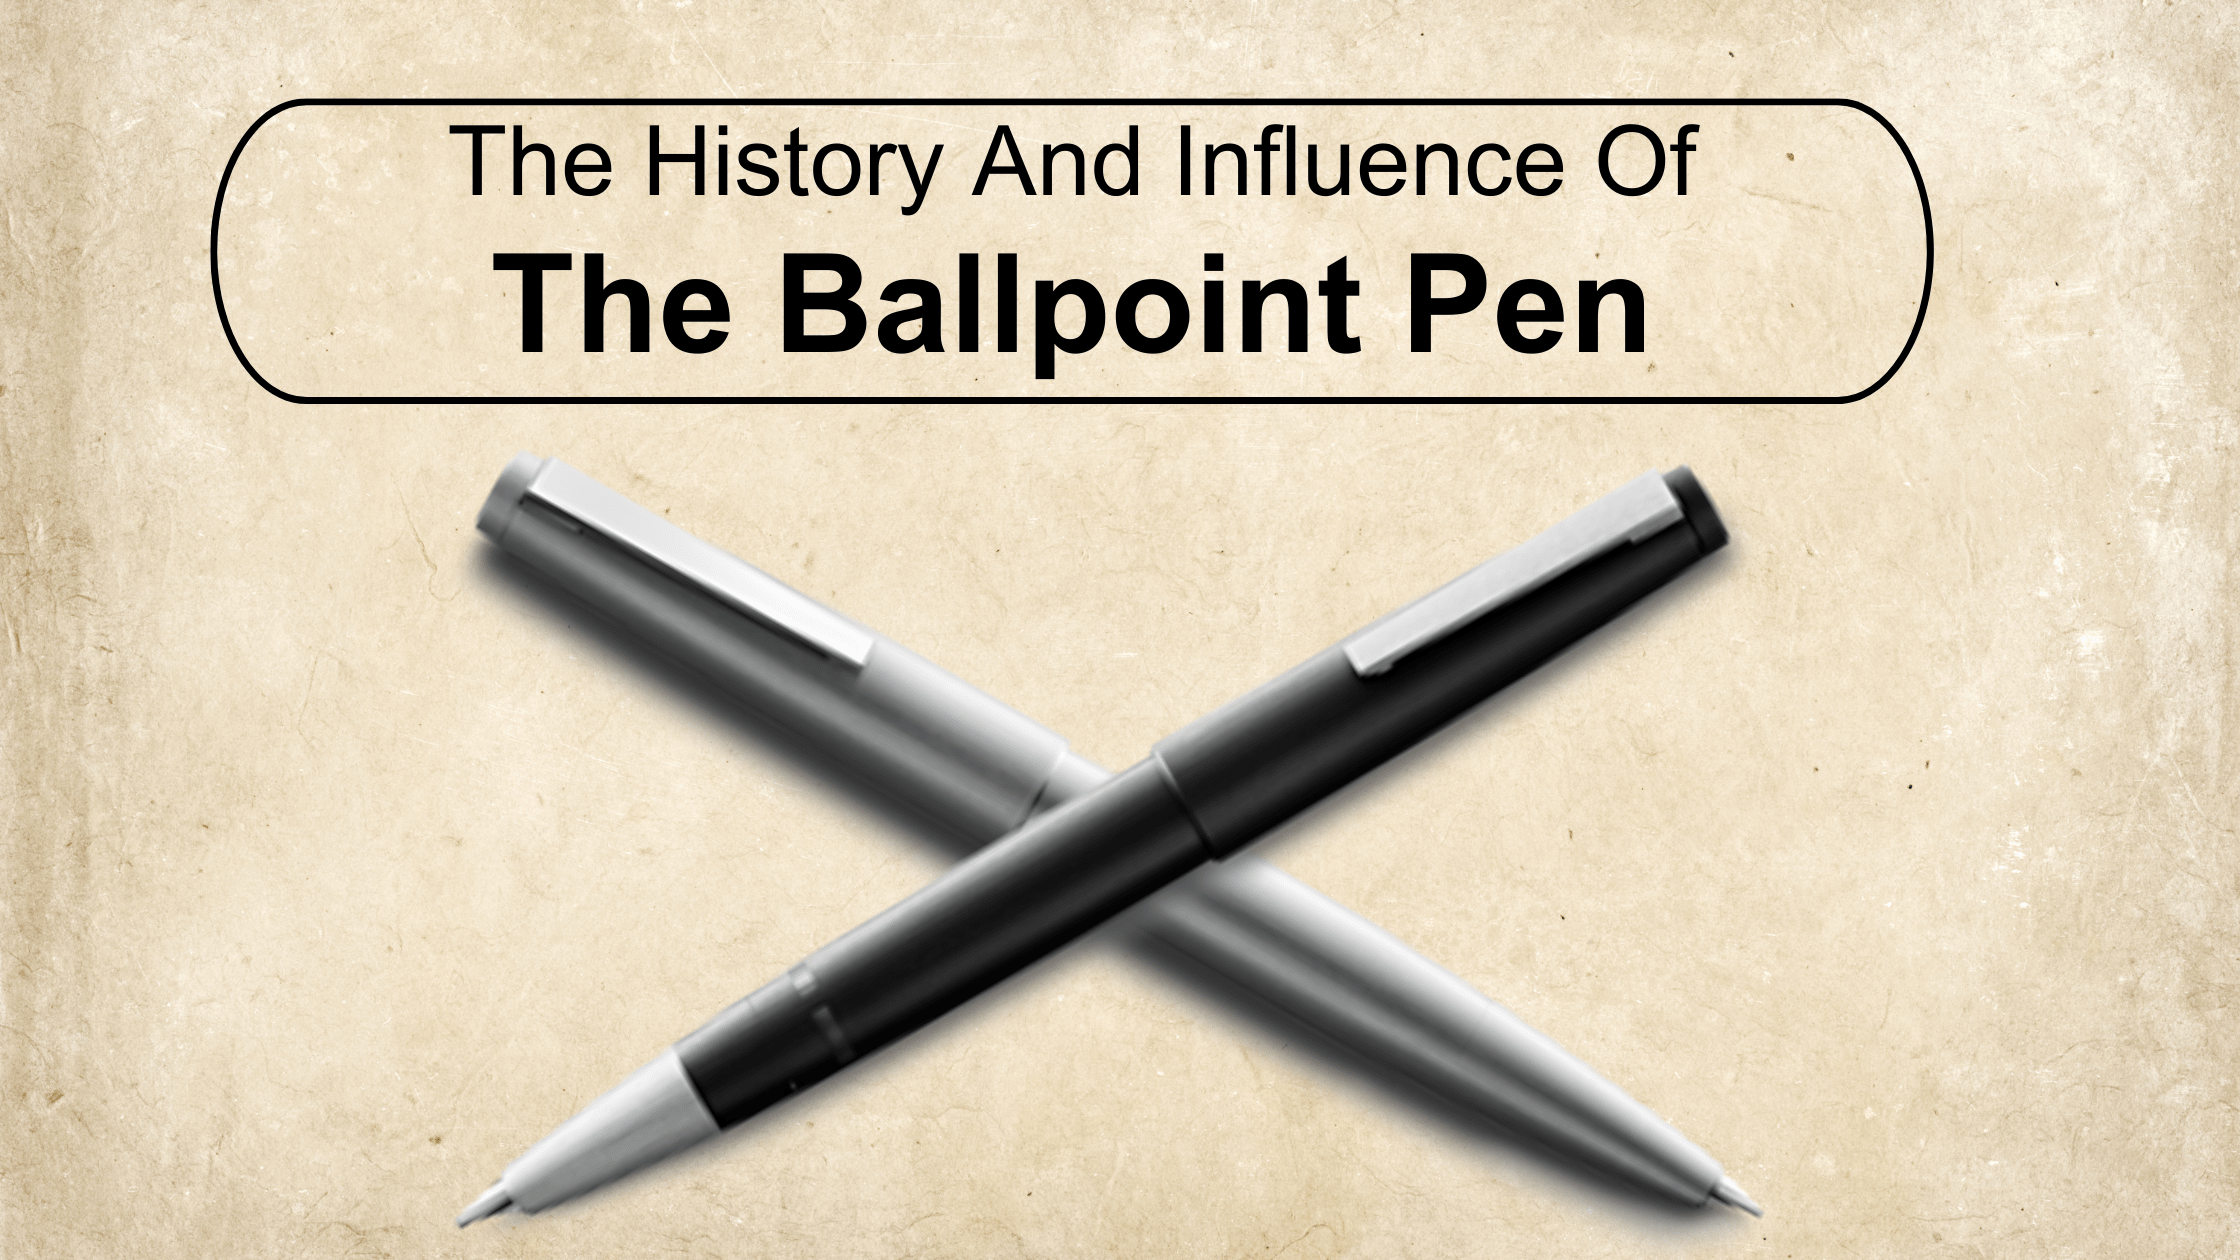 The History And Influence Of The Ballpoint Pen